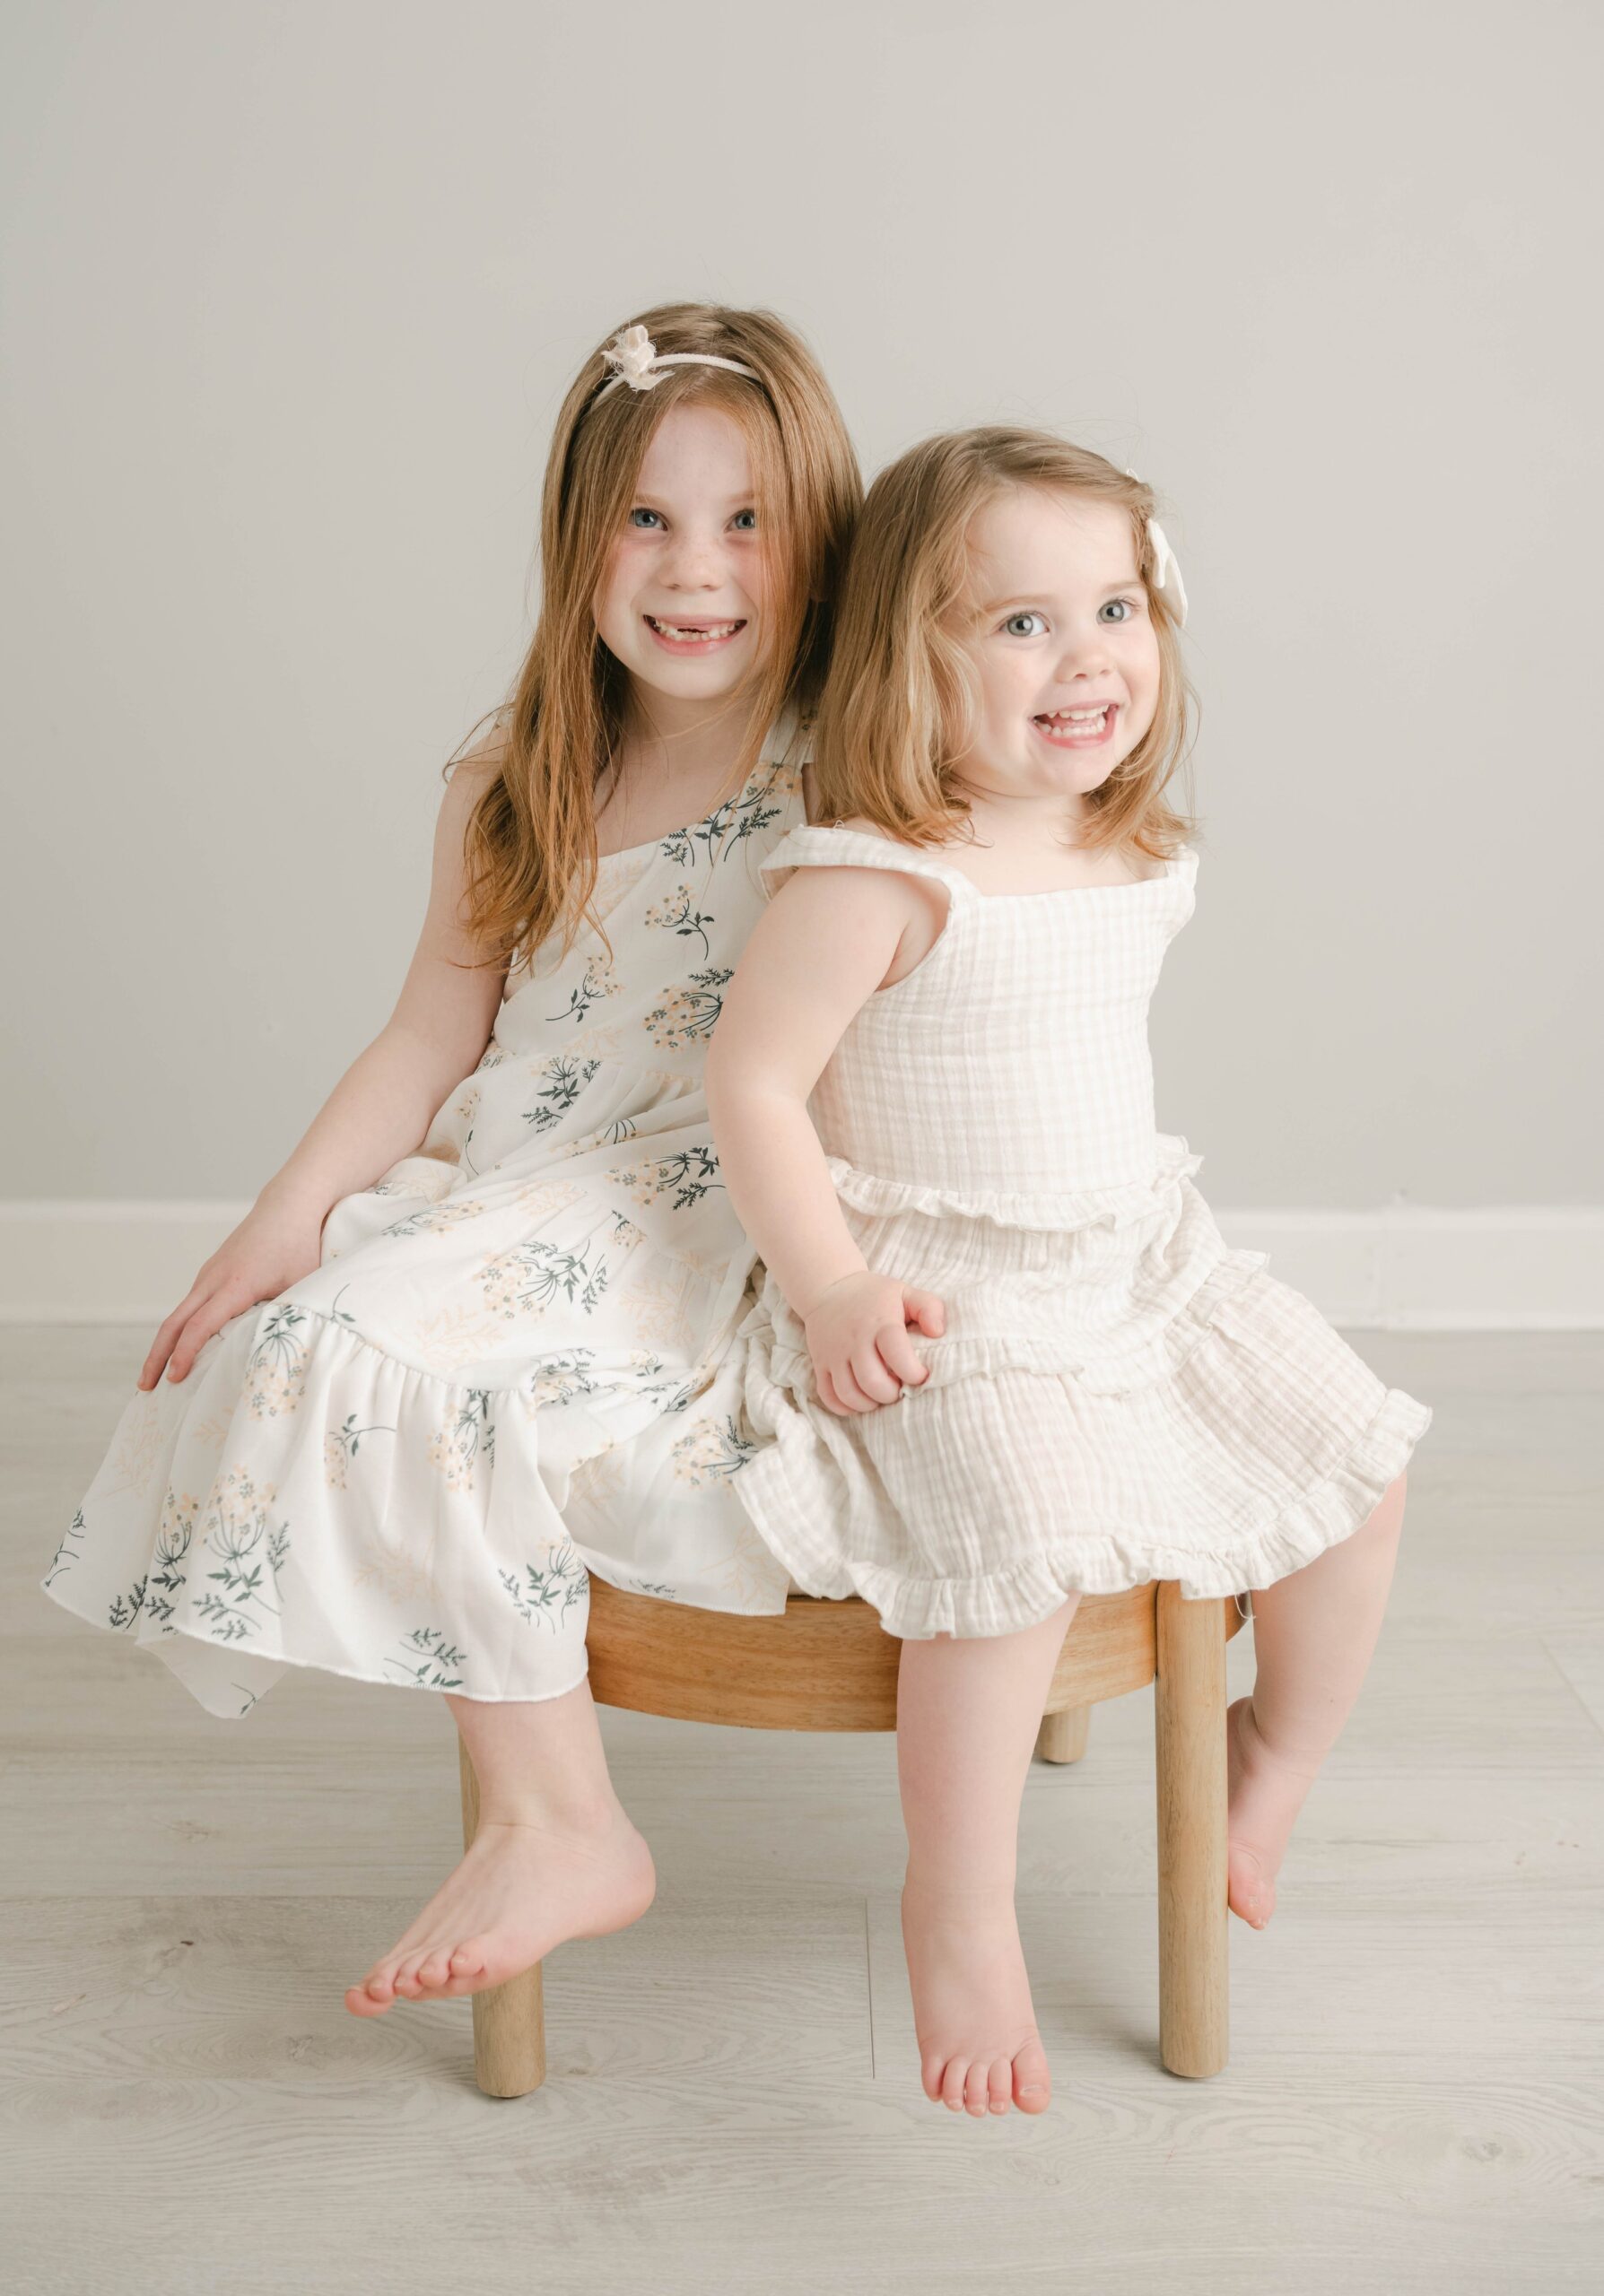 Two sisters sit on a round wooden stool together in a studio bellaboo lancaster